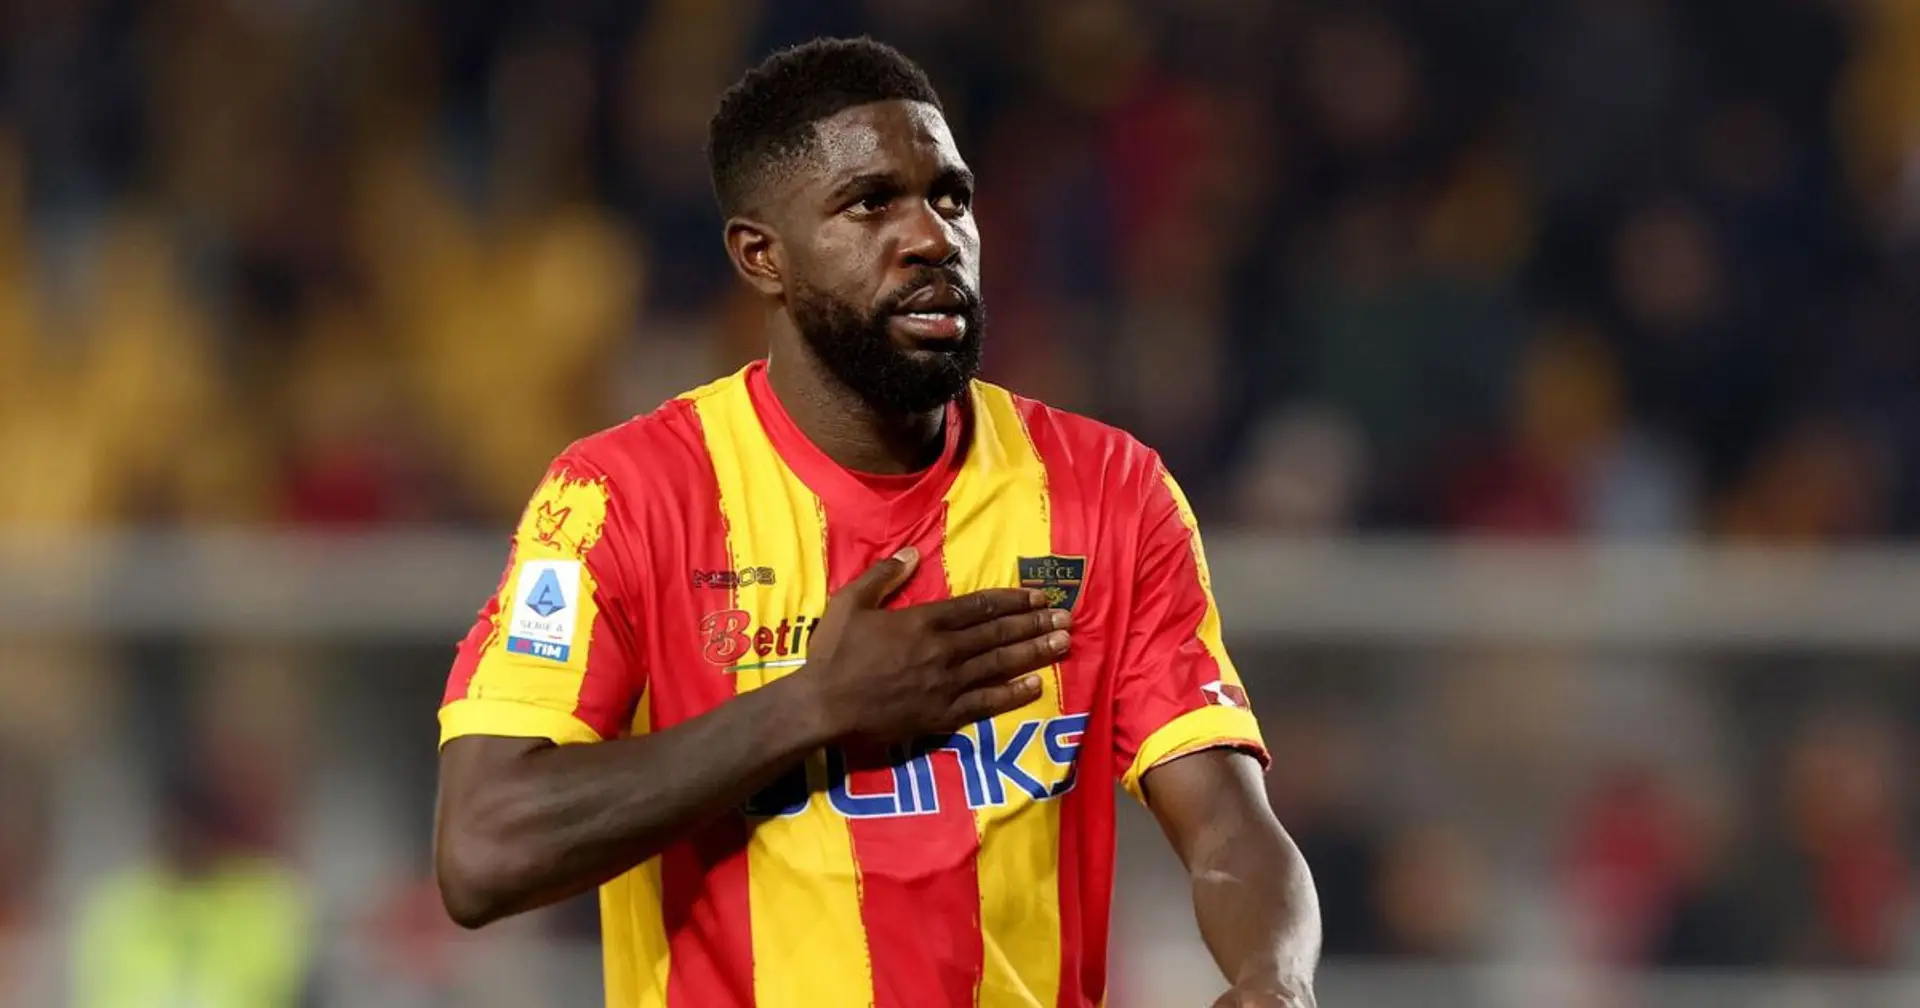 Serie A giants closely monitoring Umtiti, Barca open to the move - multiple reports